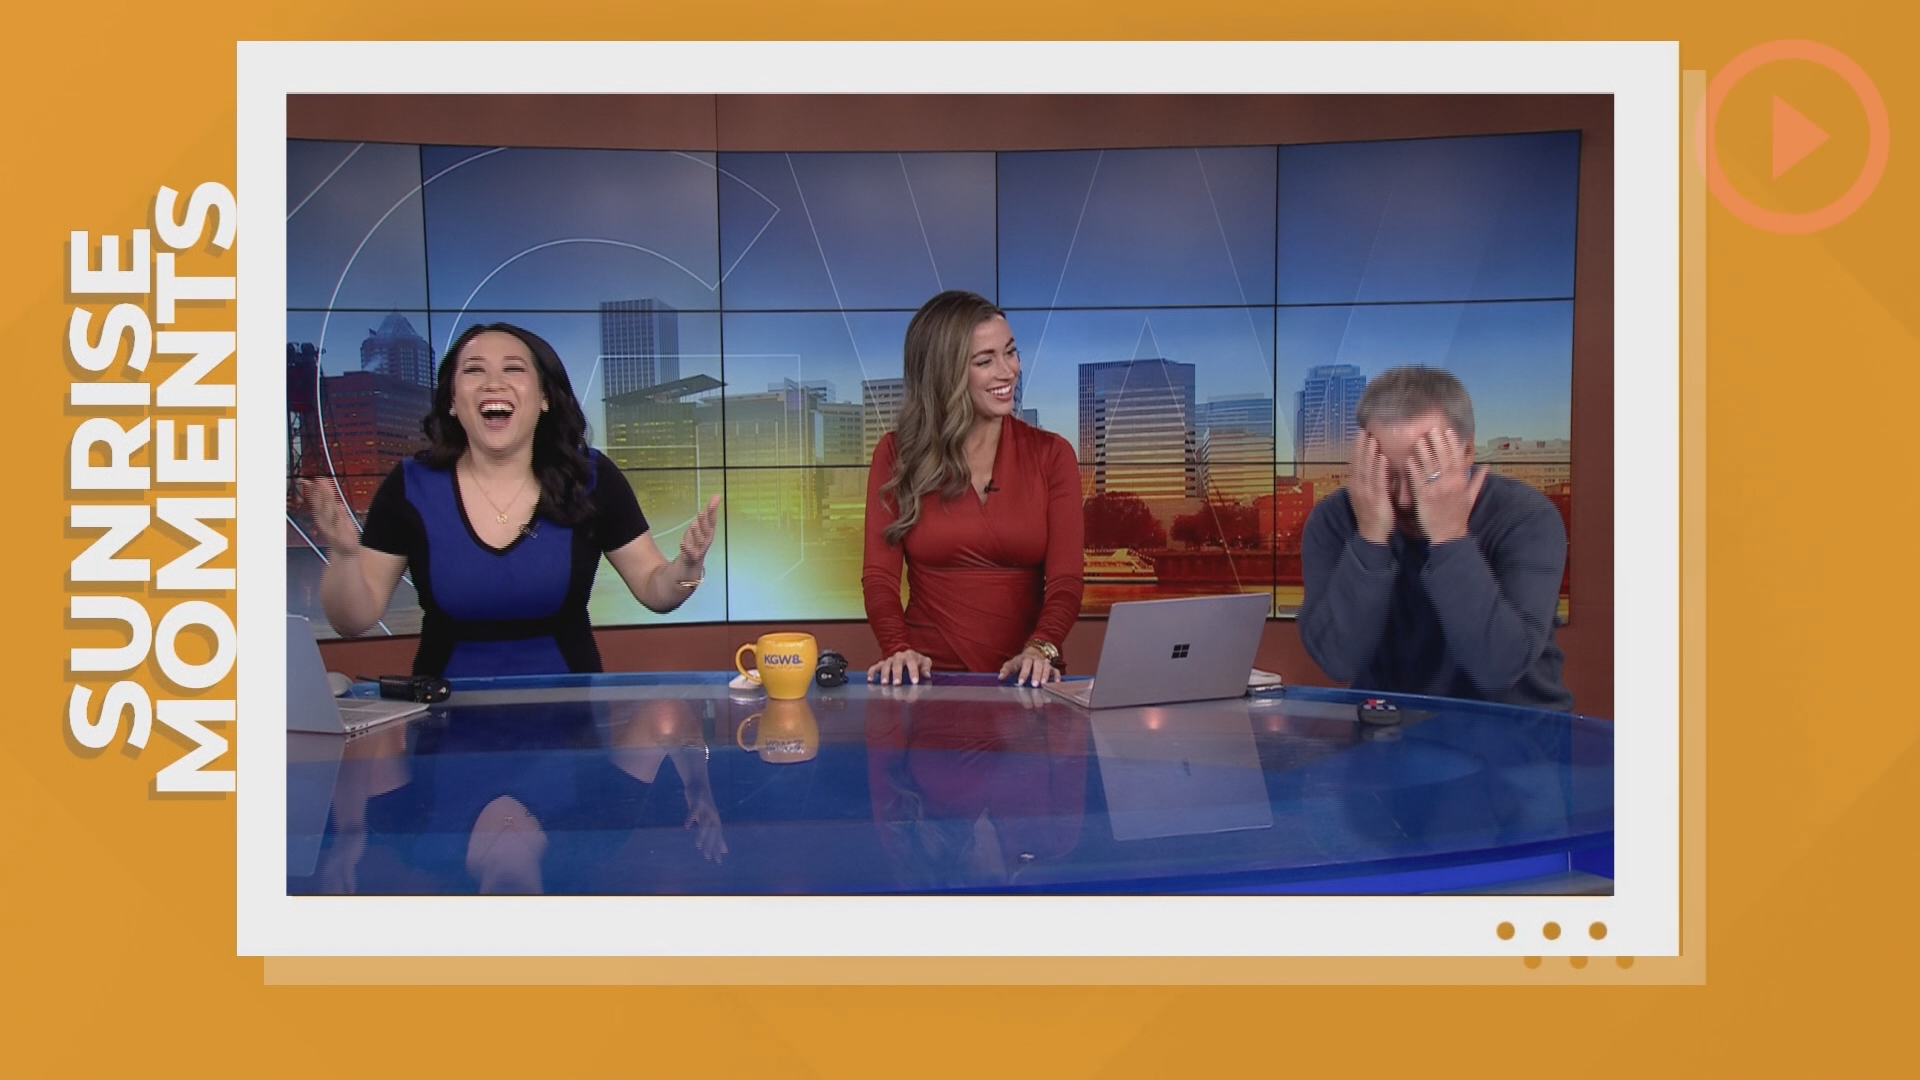 KGW Sunrise looked back at some of the lighter moments of the week.